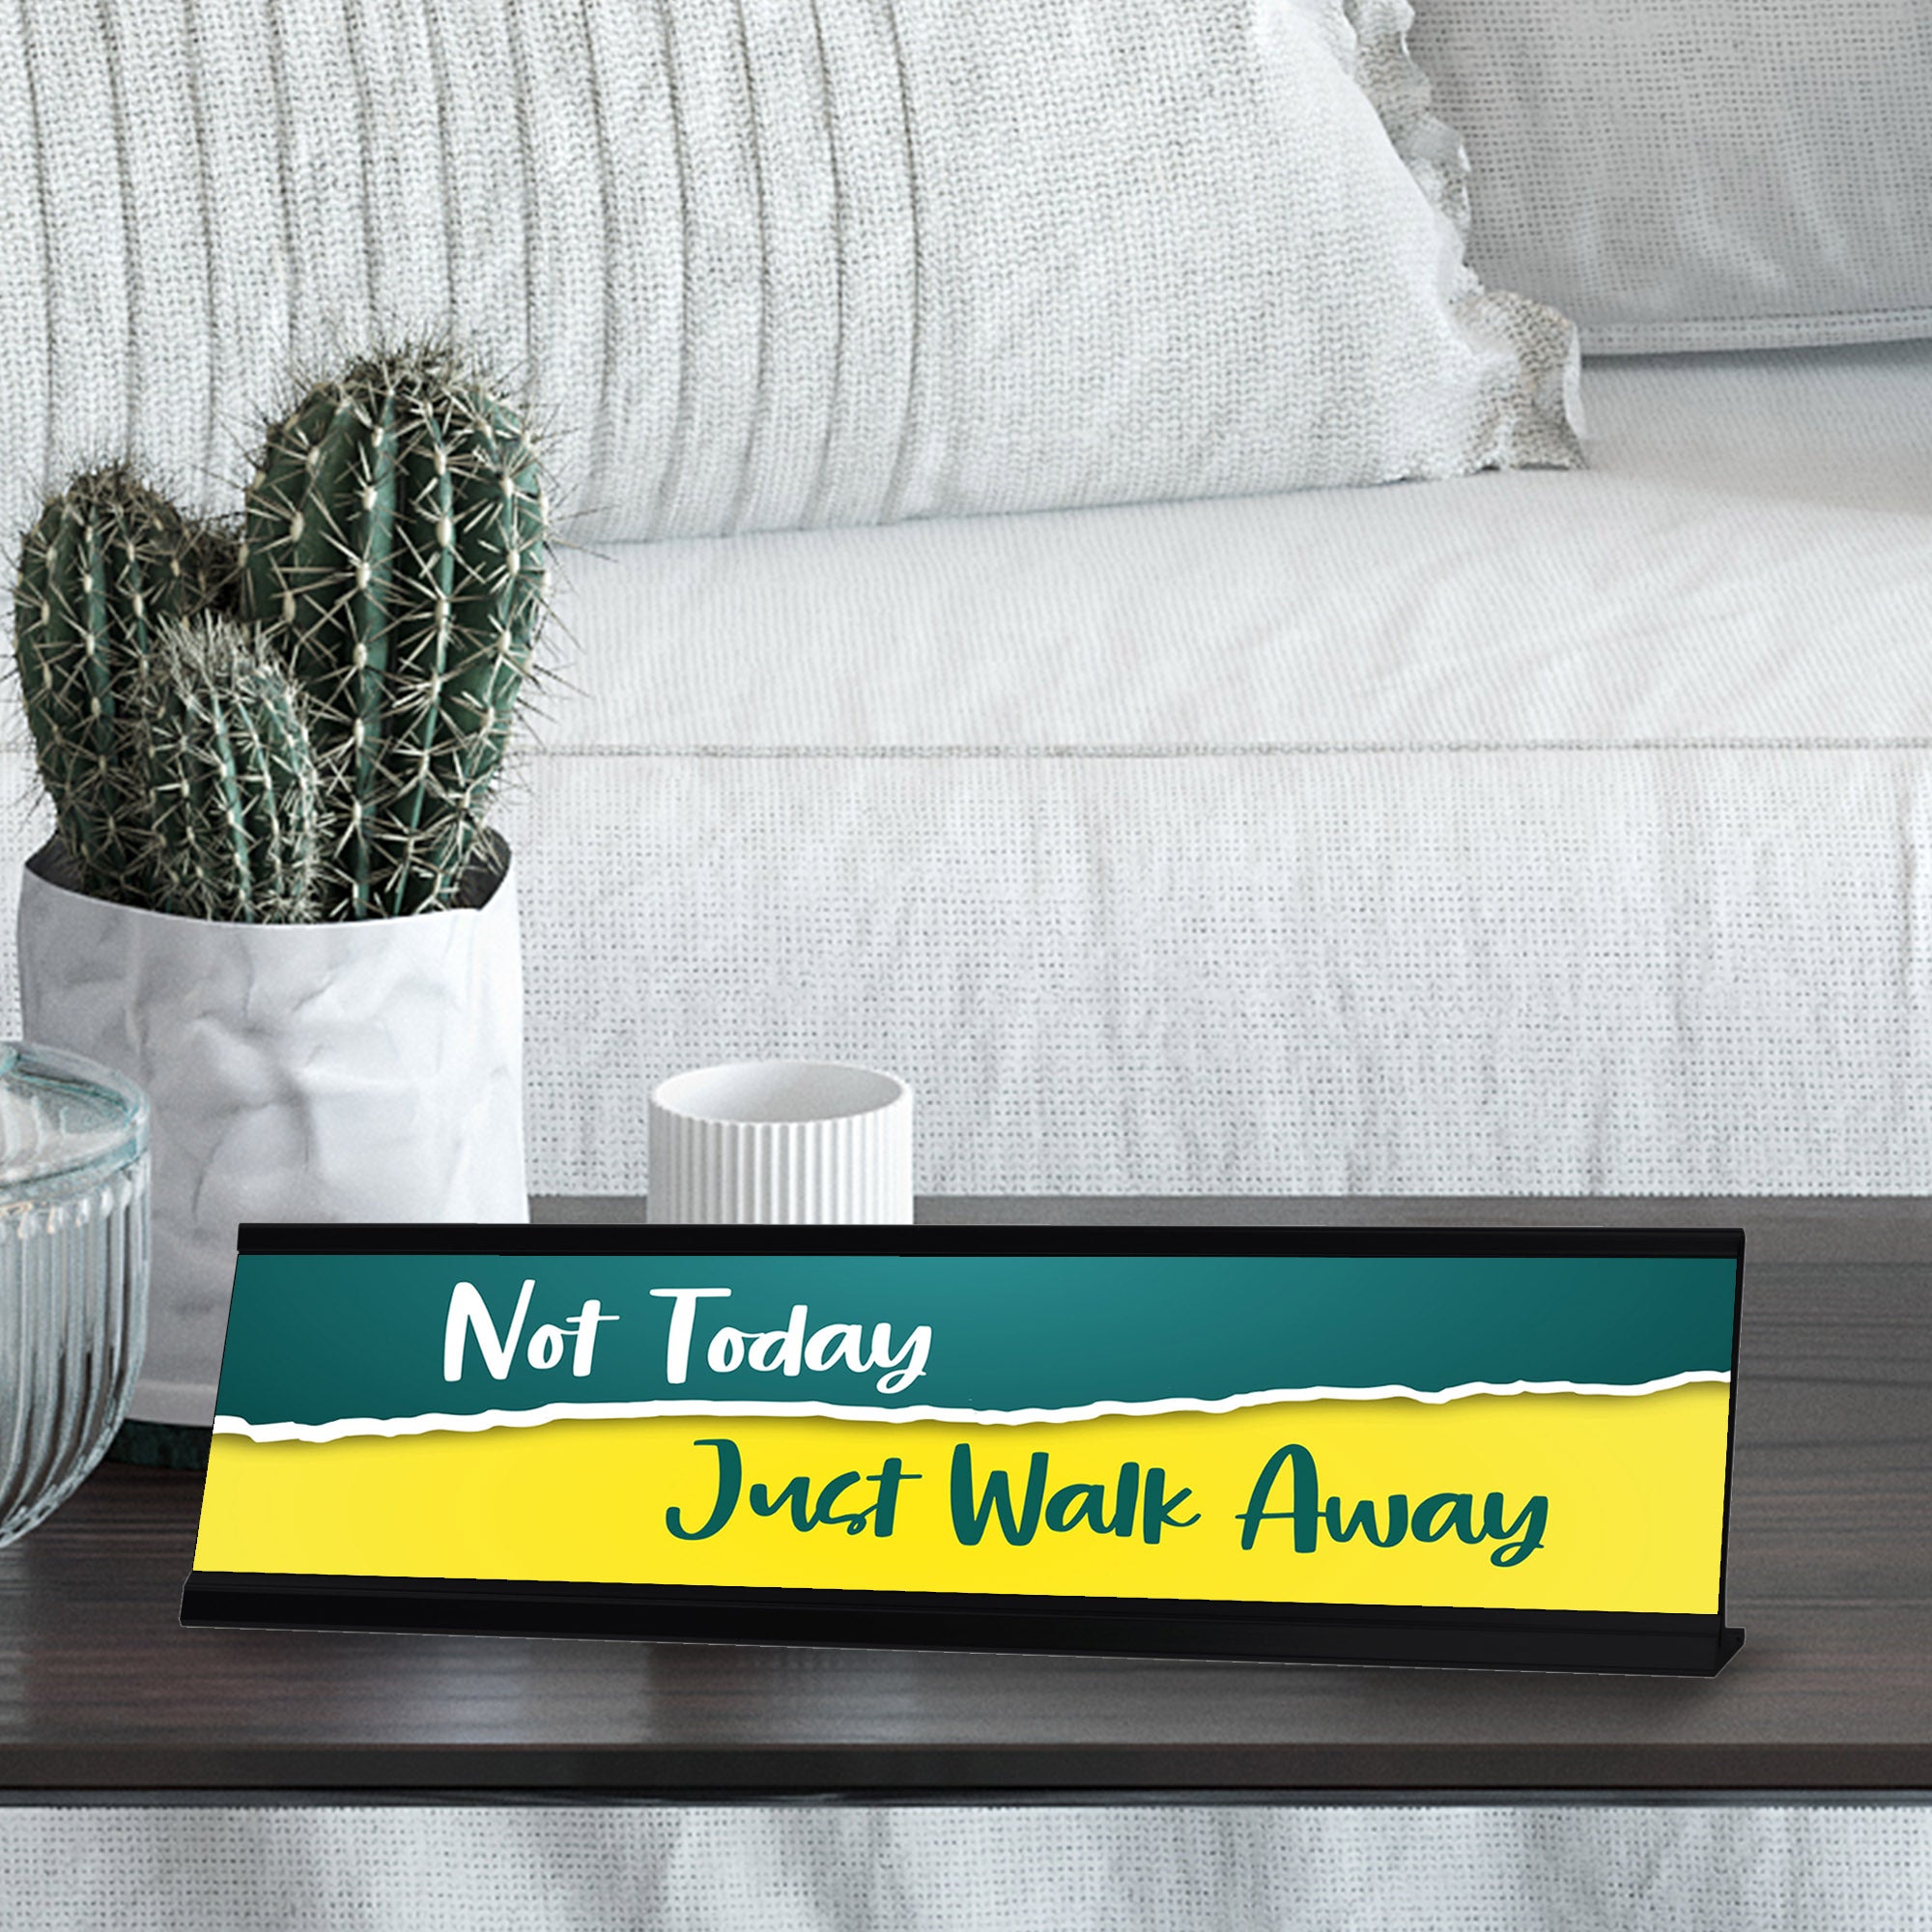 Not Today Just Walk Away, Green and Yellow Desk Sign (2 x 8")